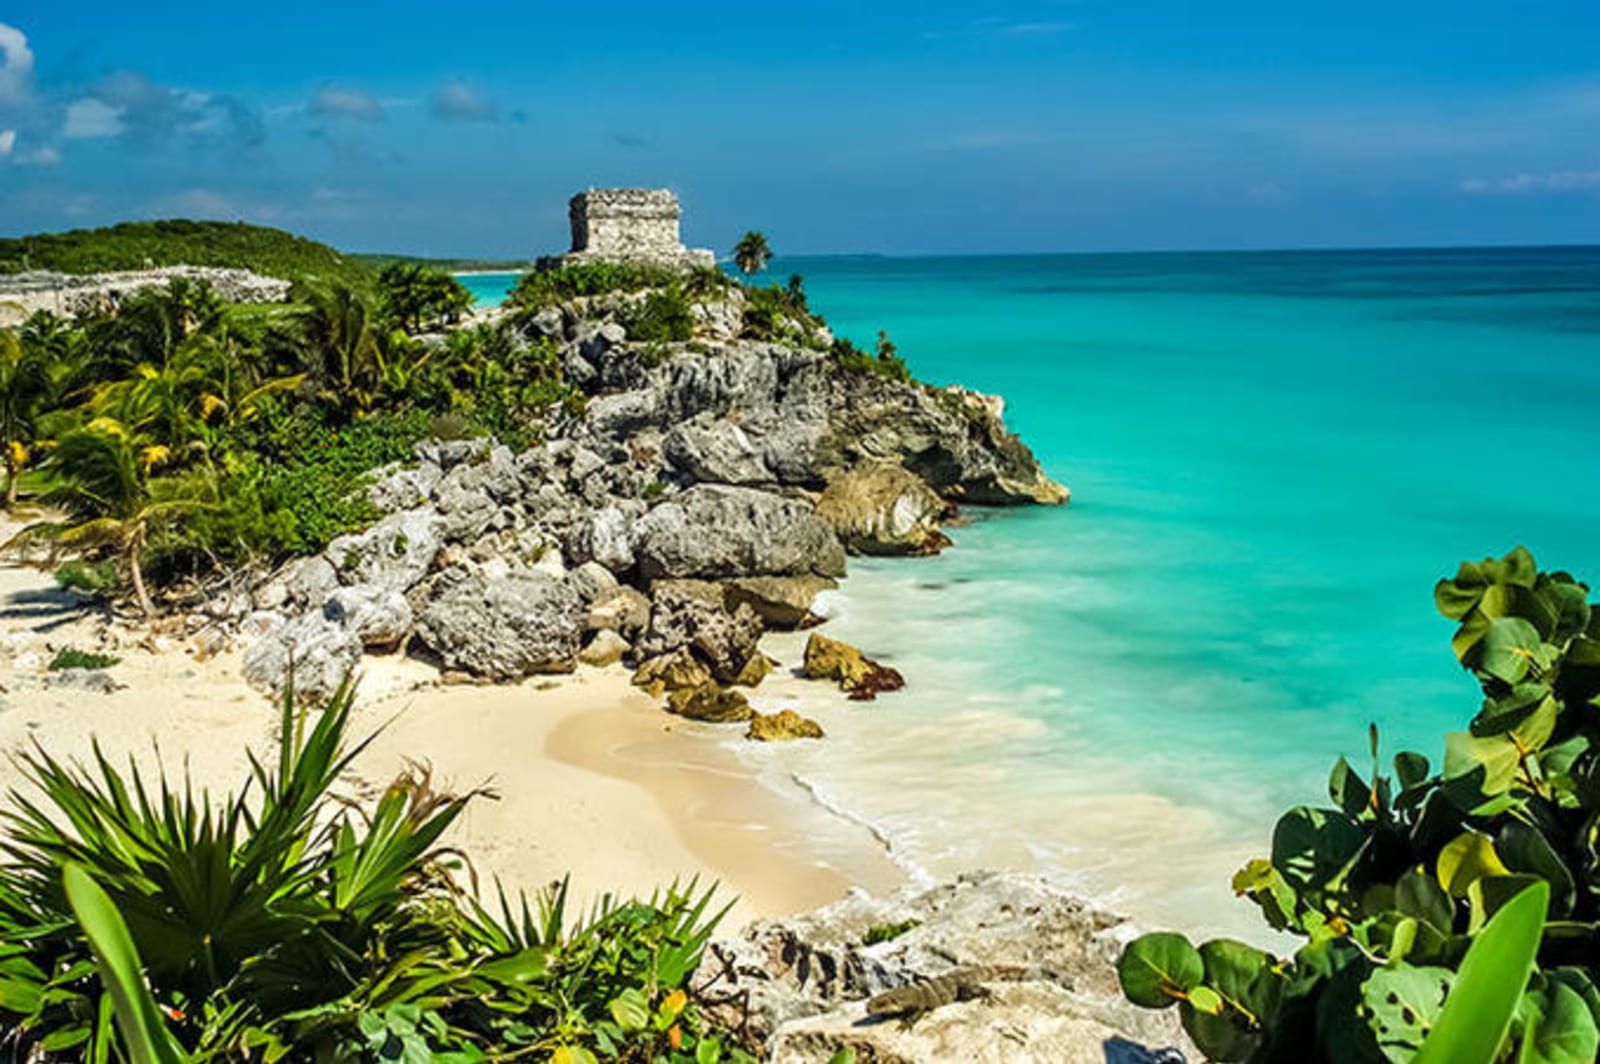 Tulum - Ancient Mayan ruins on the coastline with bright blue water